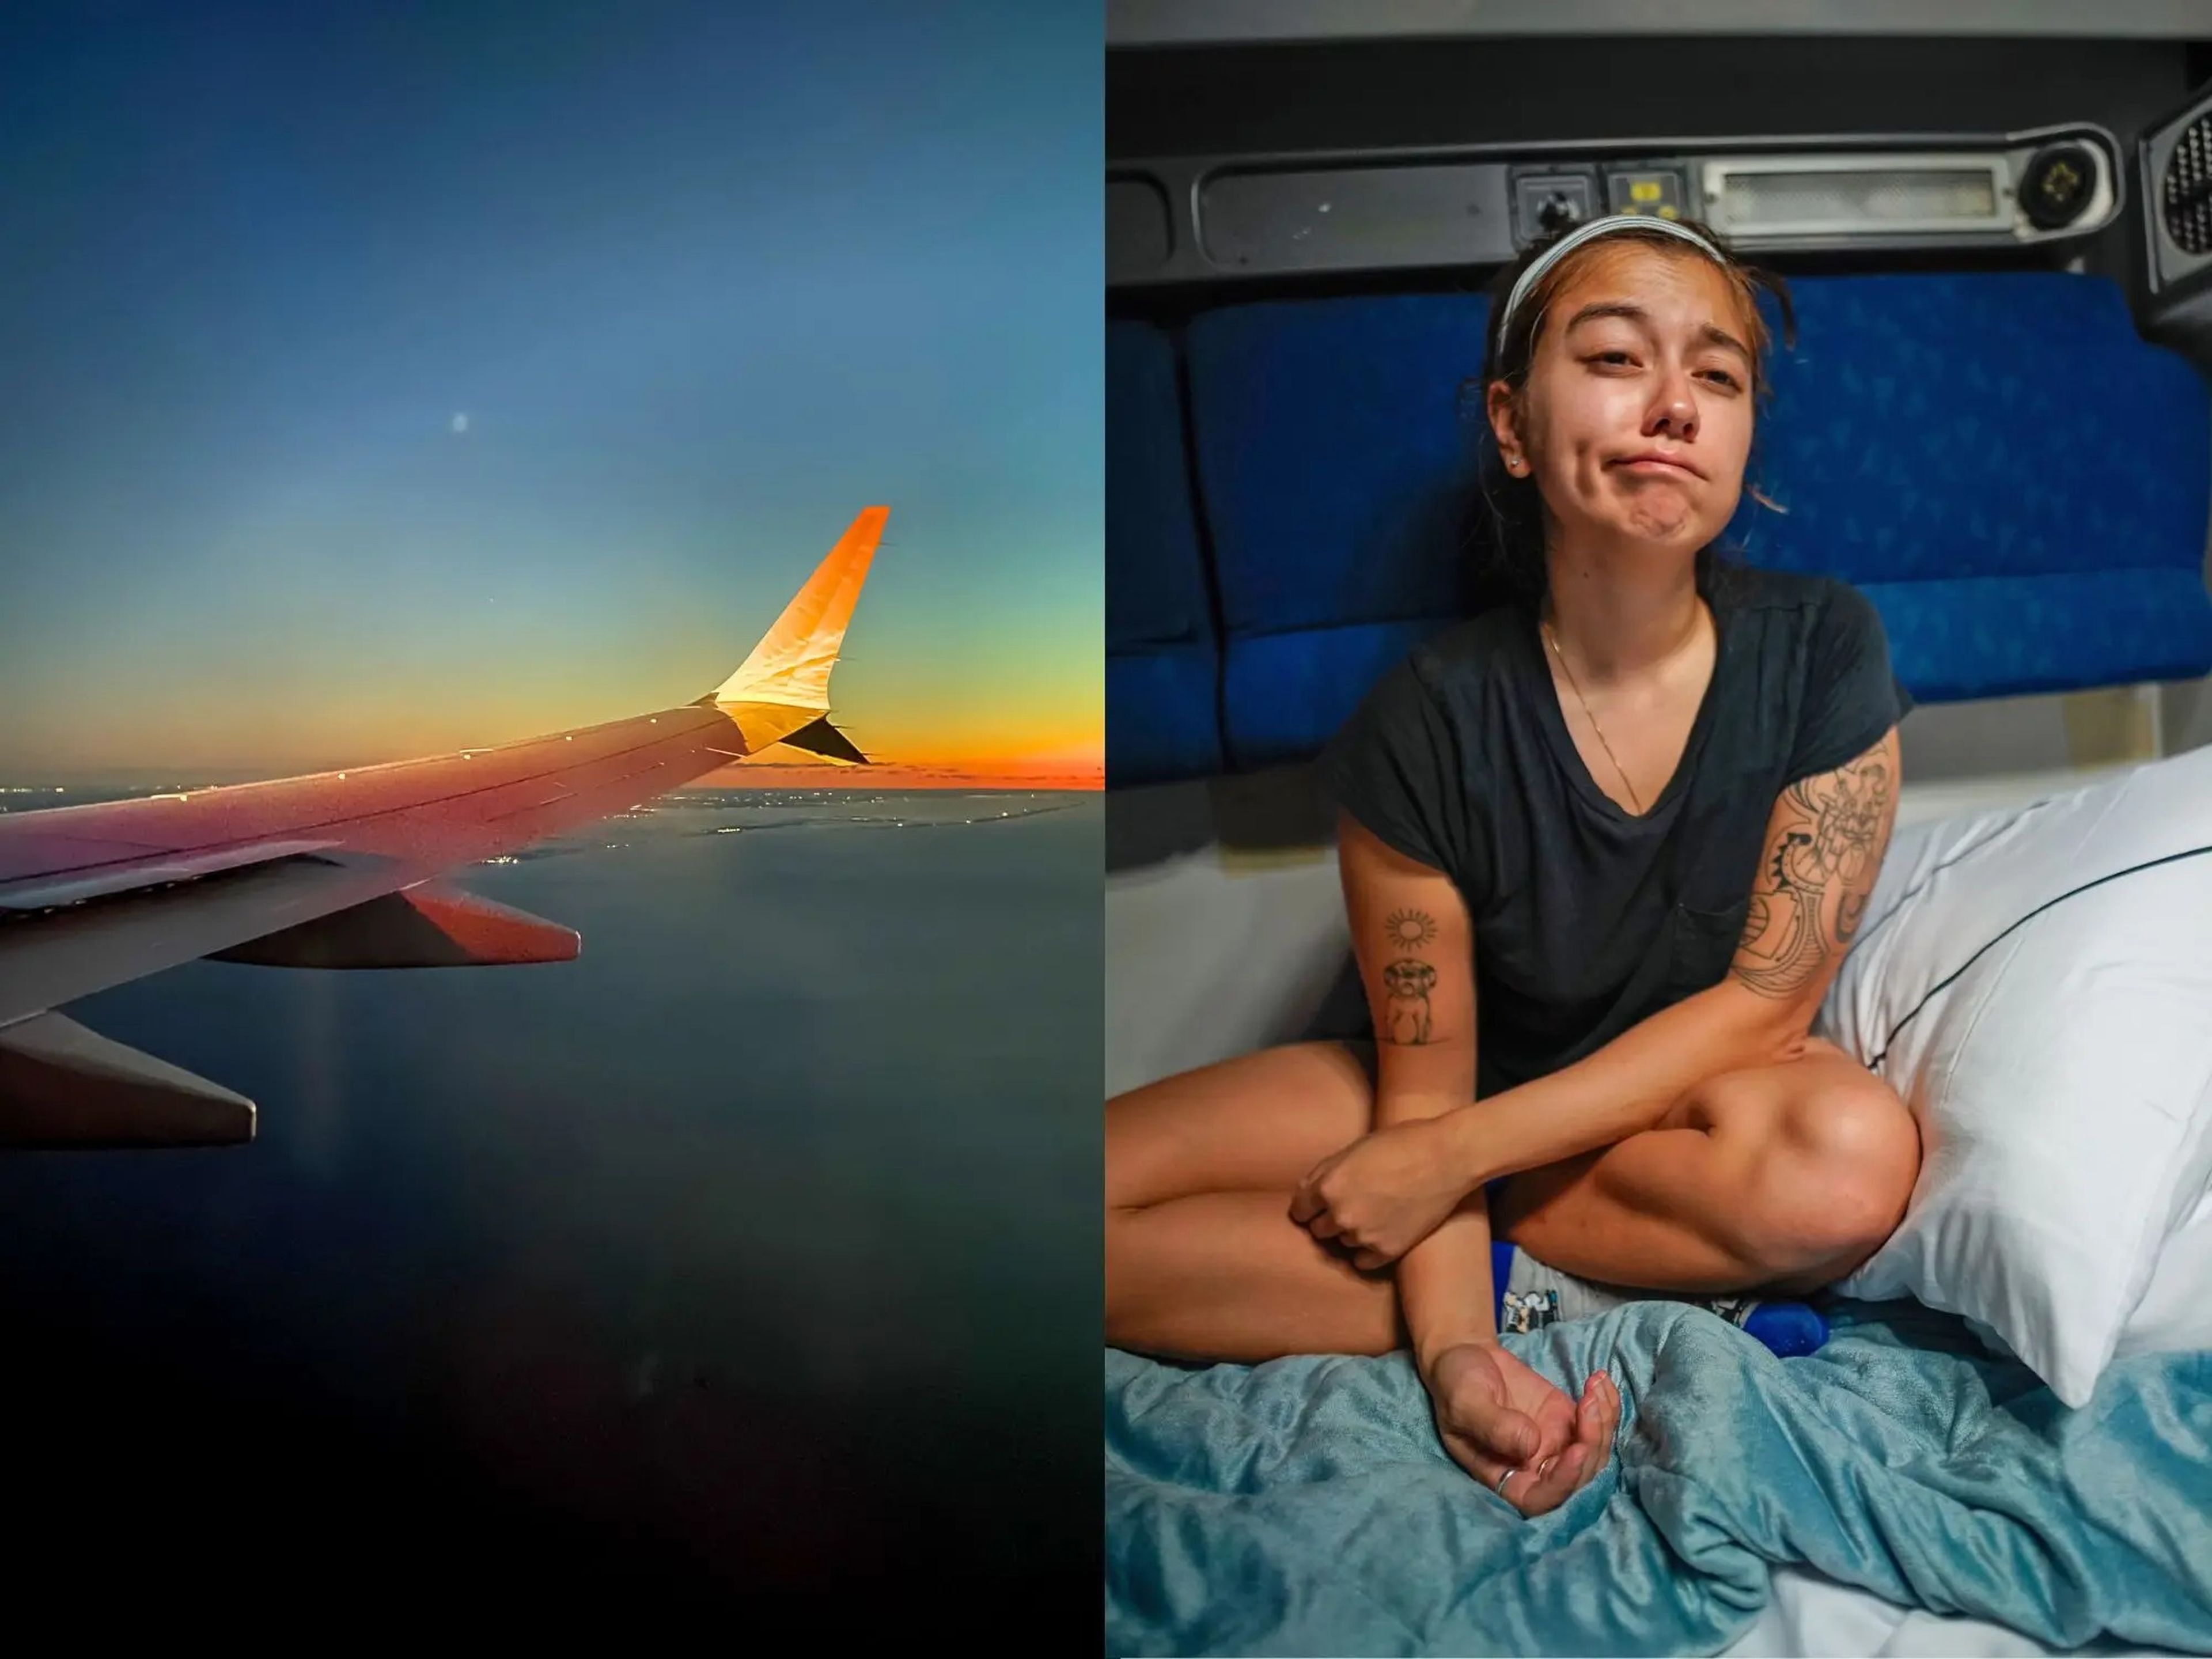 Left: A sunset out a plane window. Right: The author sits tired on a train bed